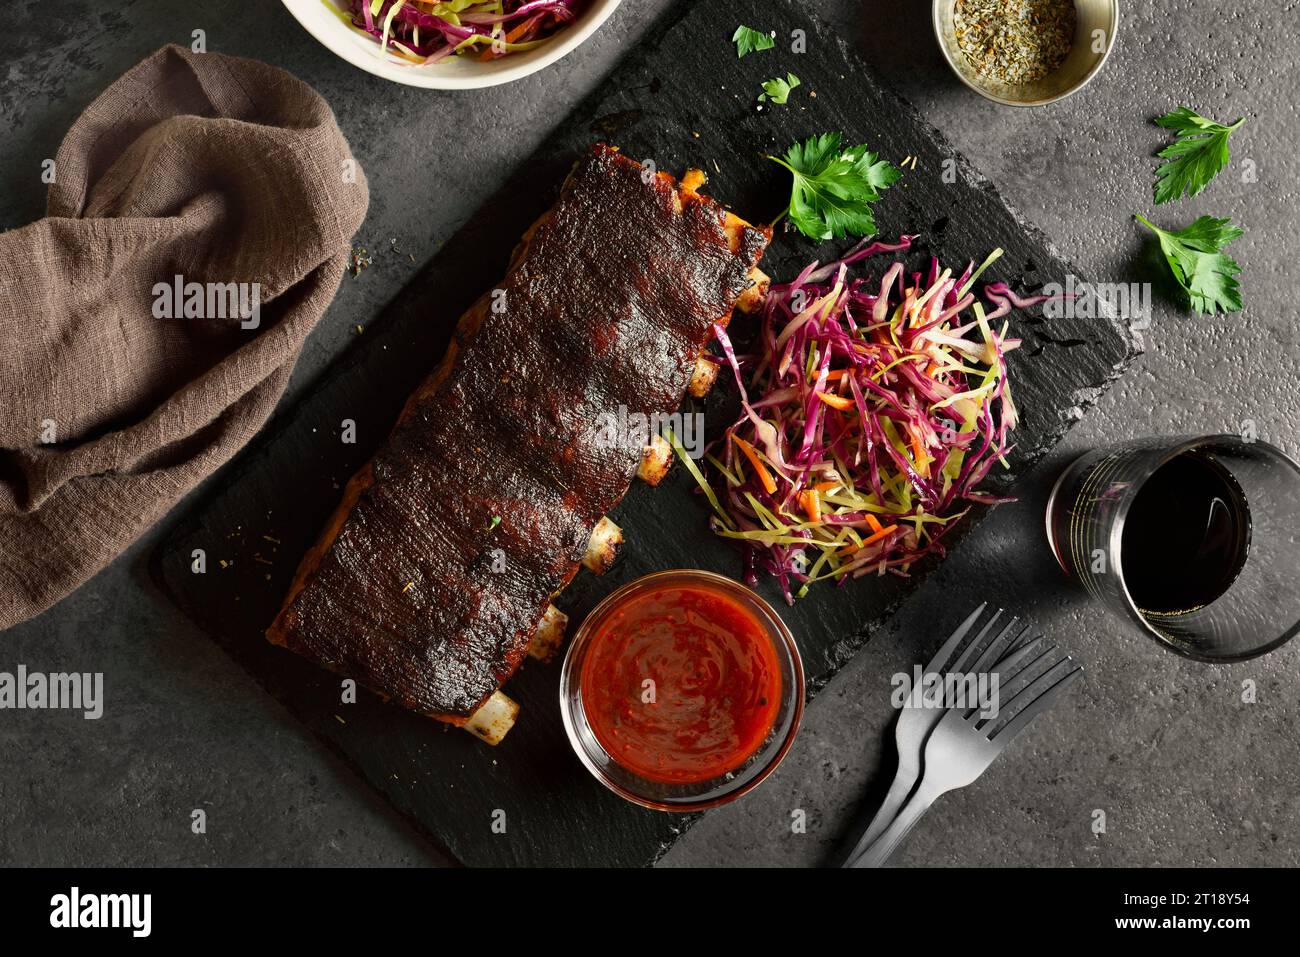 Grilled spare ribs on board over dark stone background. Top view, flat lay Stock Photo